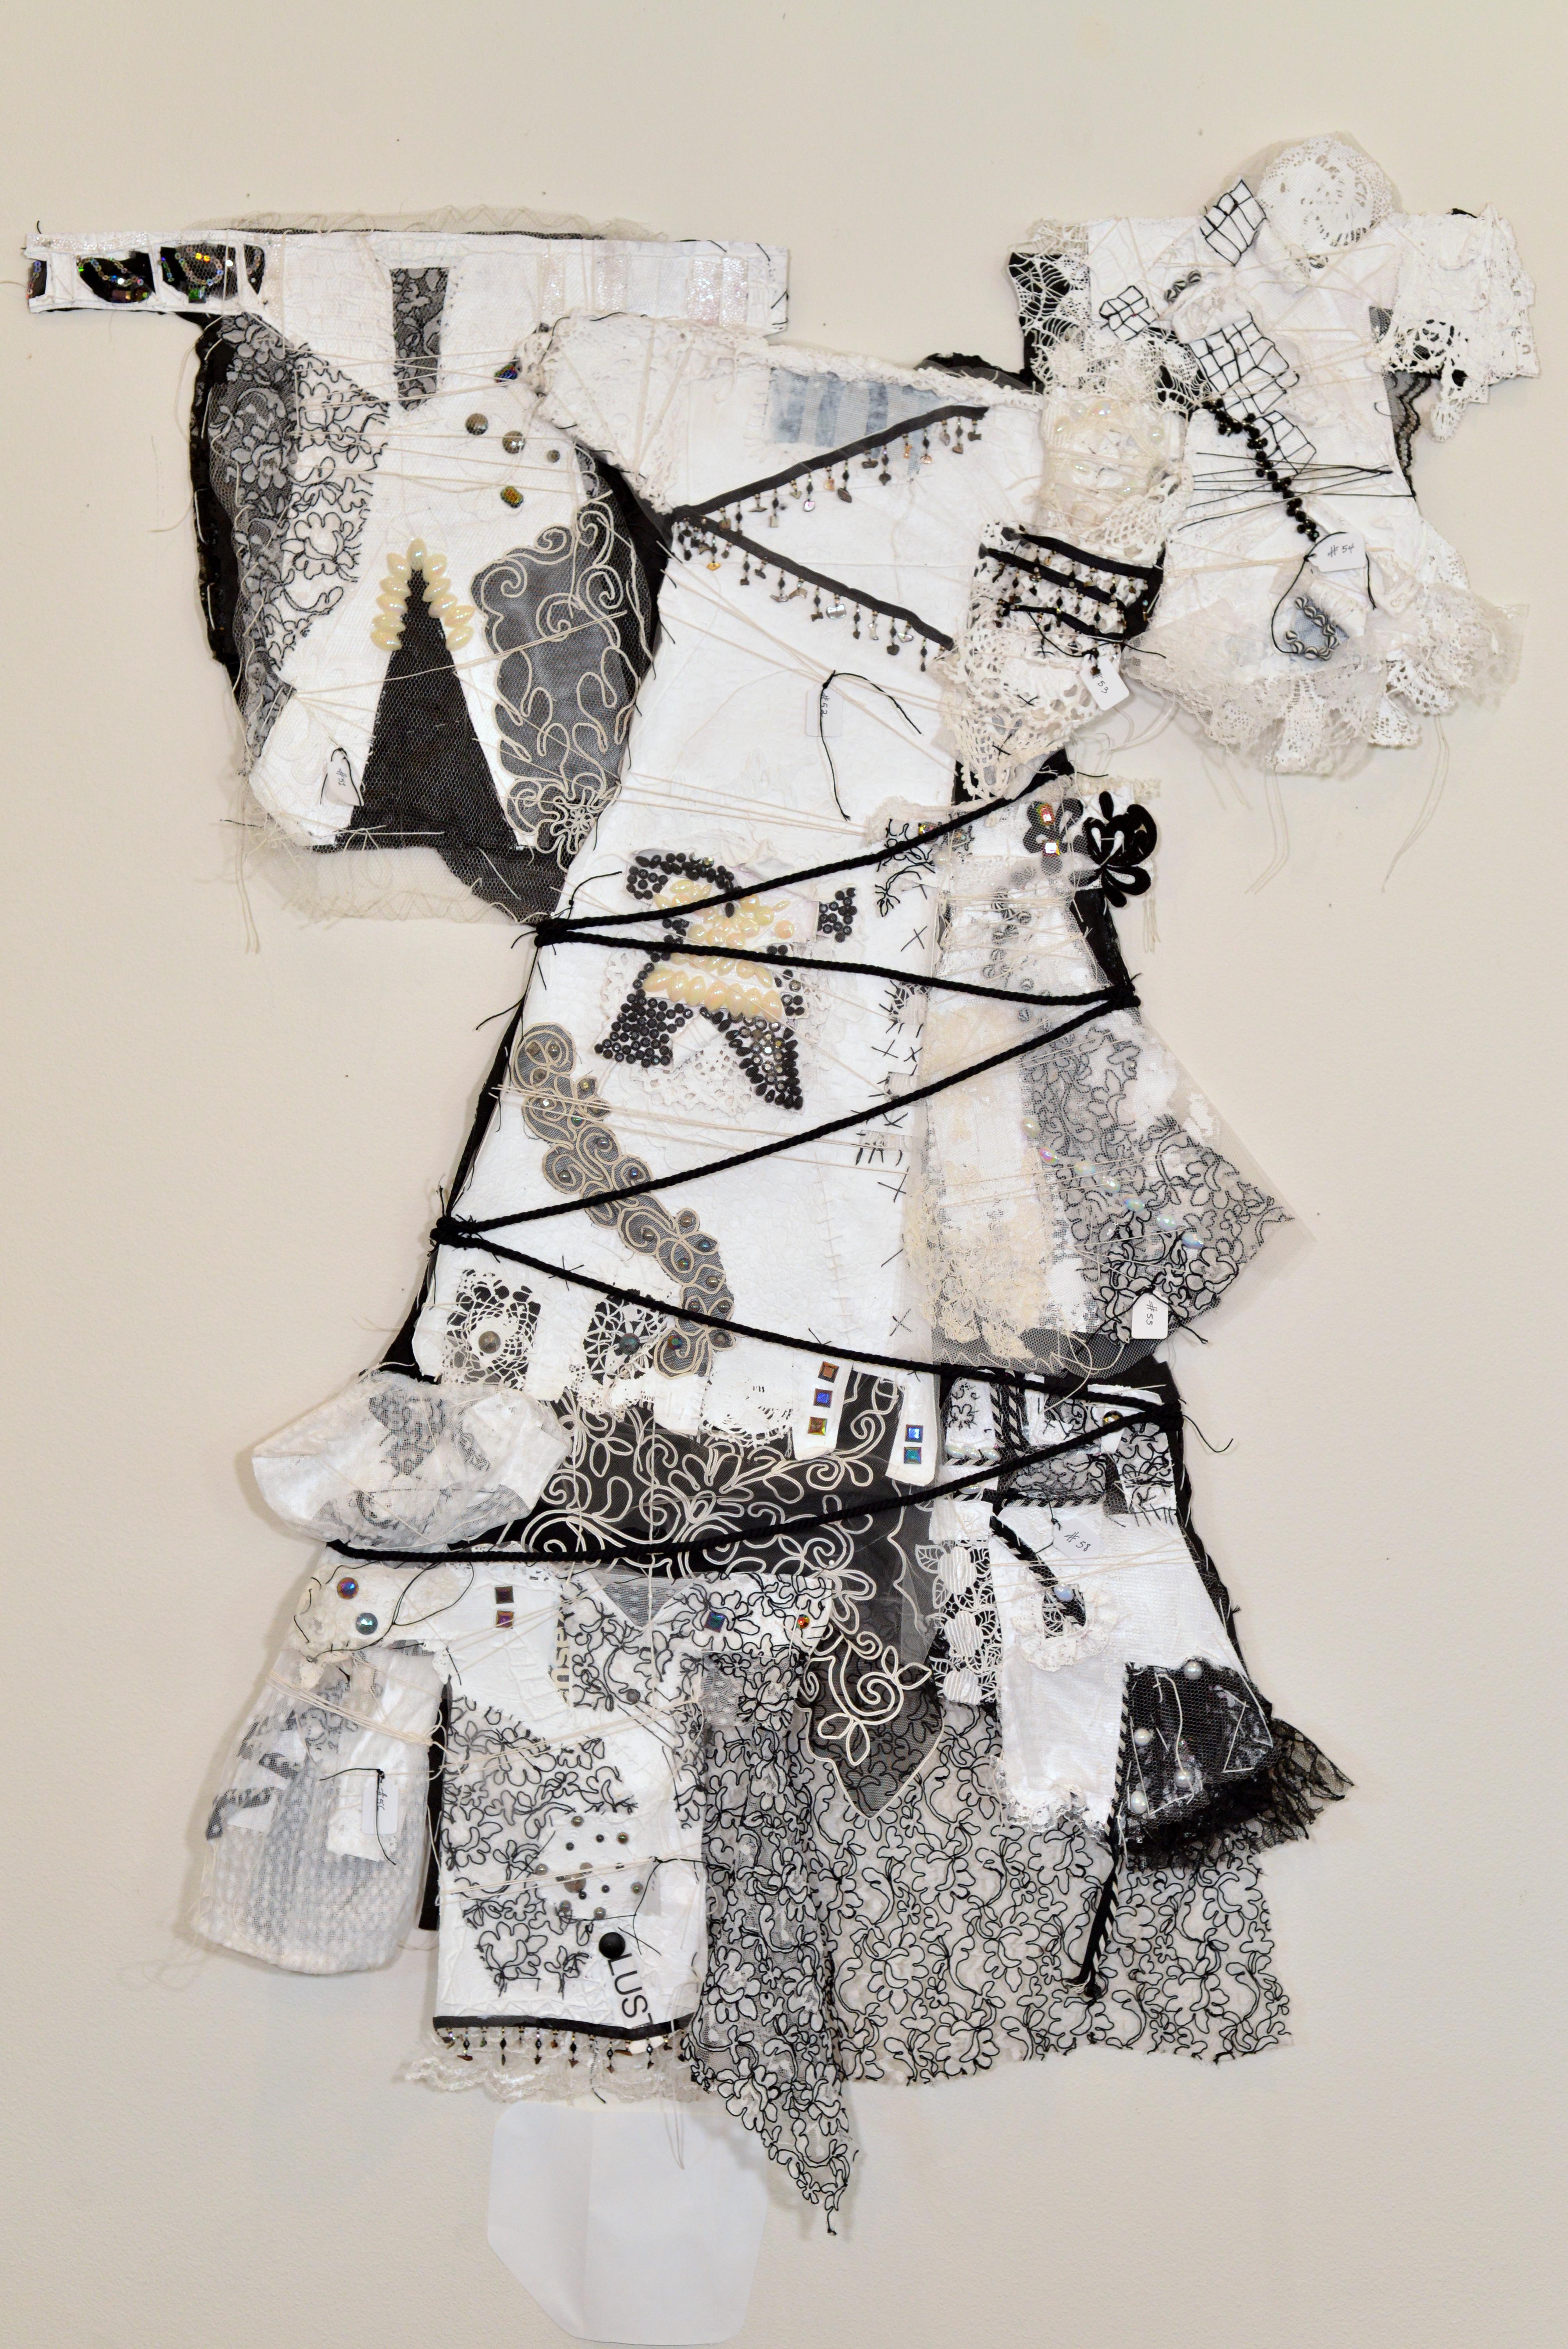 Remnants 7, Medium White/Black dress with 7 small dresses sewn on - Mixed Media Art by Andrée Carter